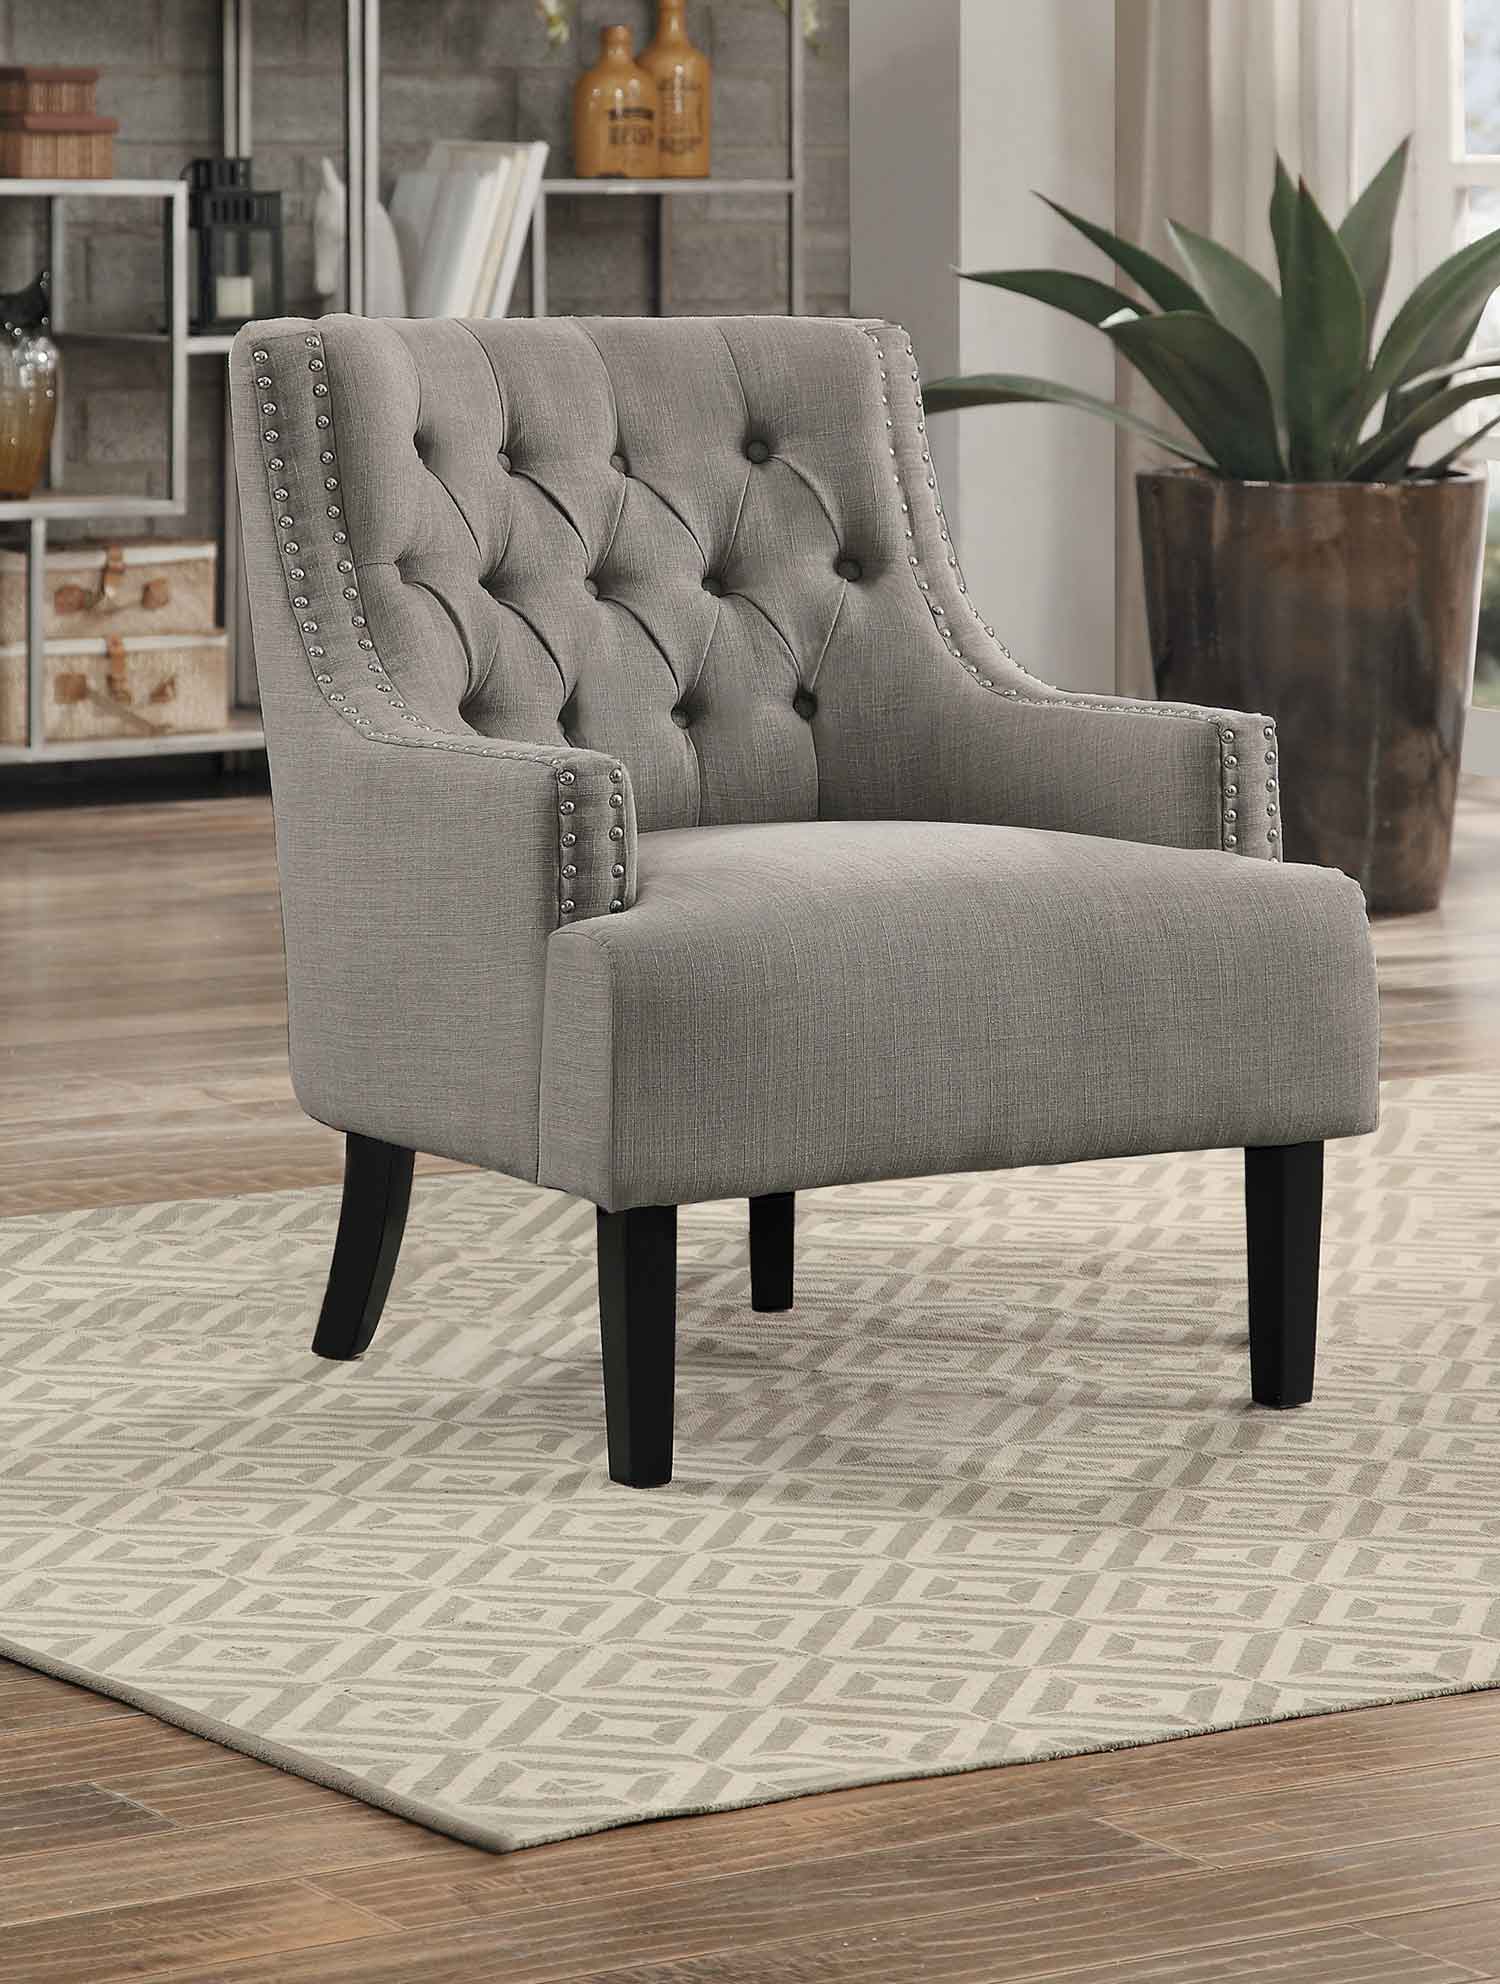 Homelegance Charisma Accent Chair - Taupe